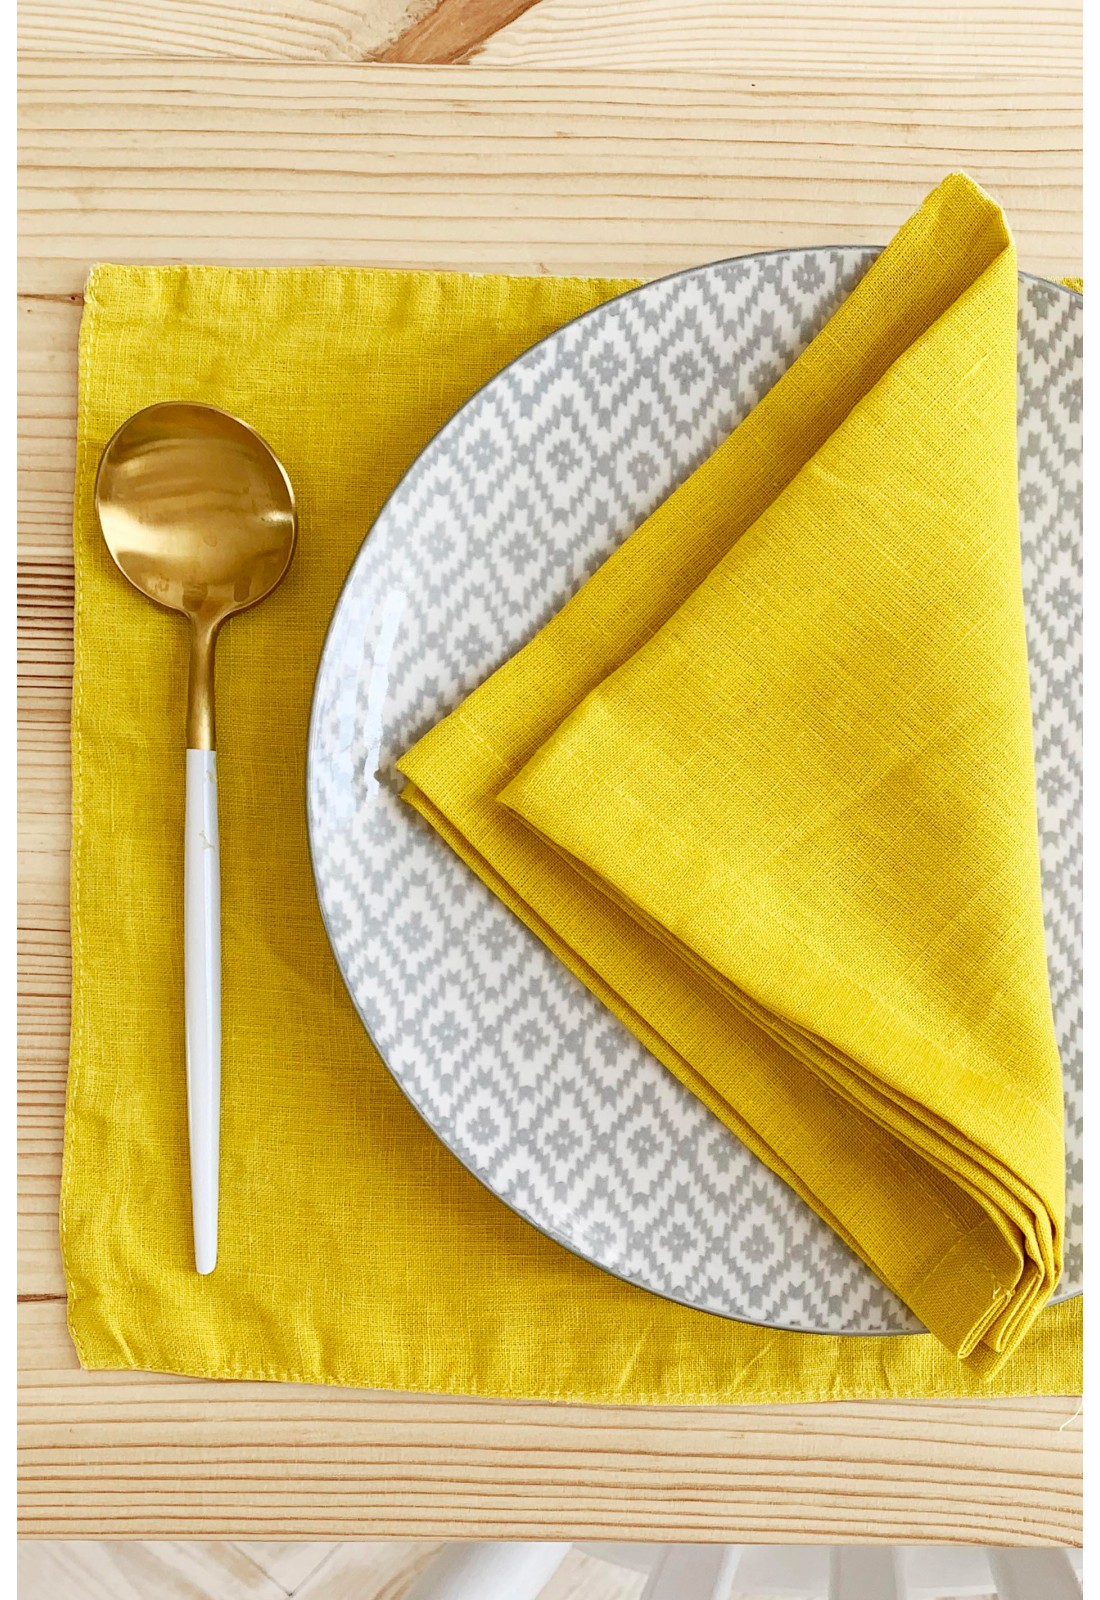 https://www.touchablelinen.com/image/cache/catalog/products/19/Linen-napkins-in-yellow-8-1100x1600.jpg